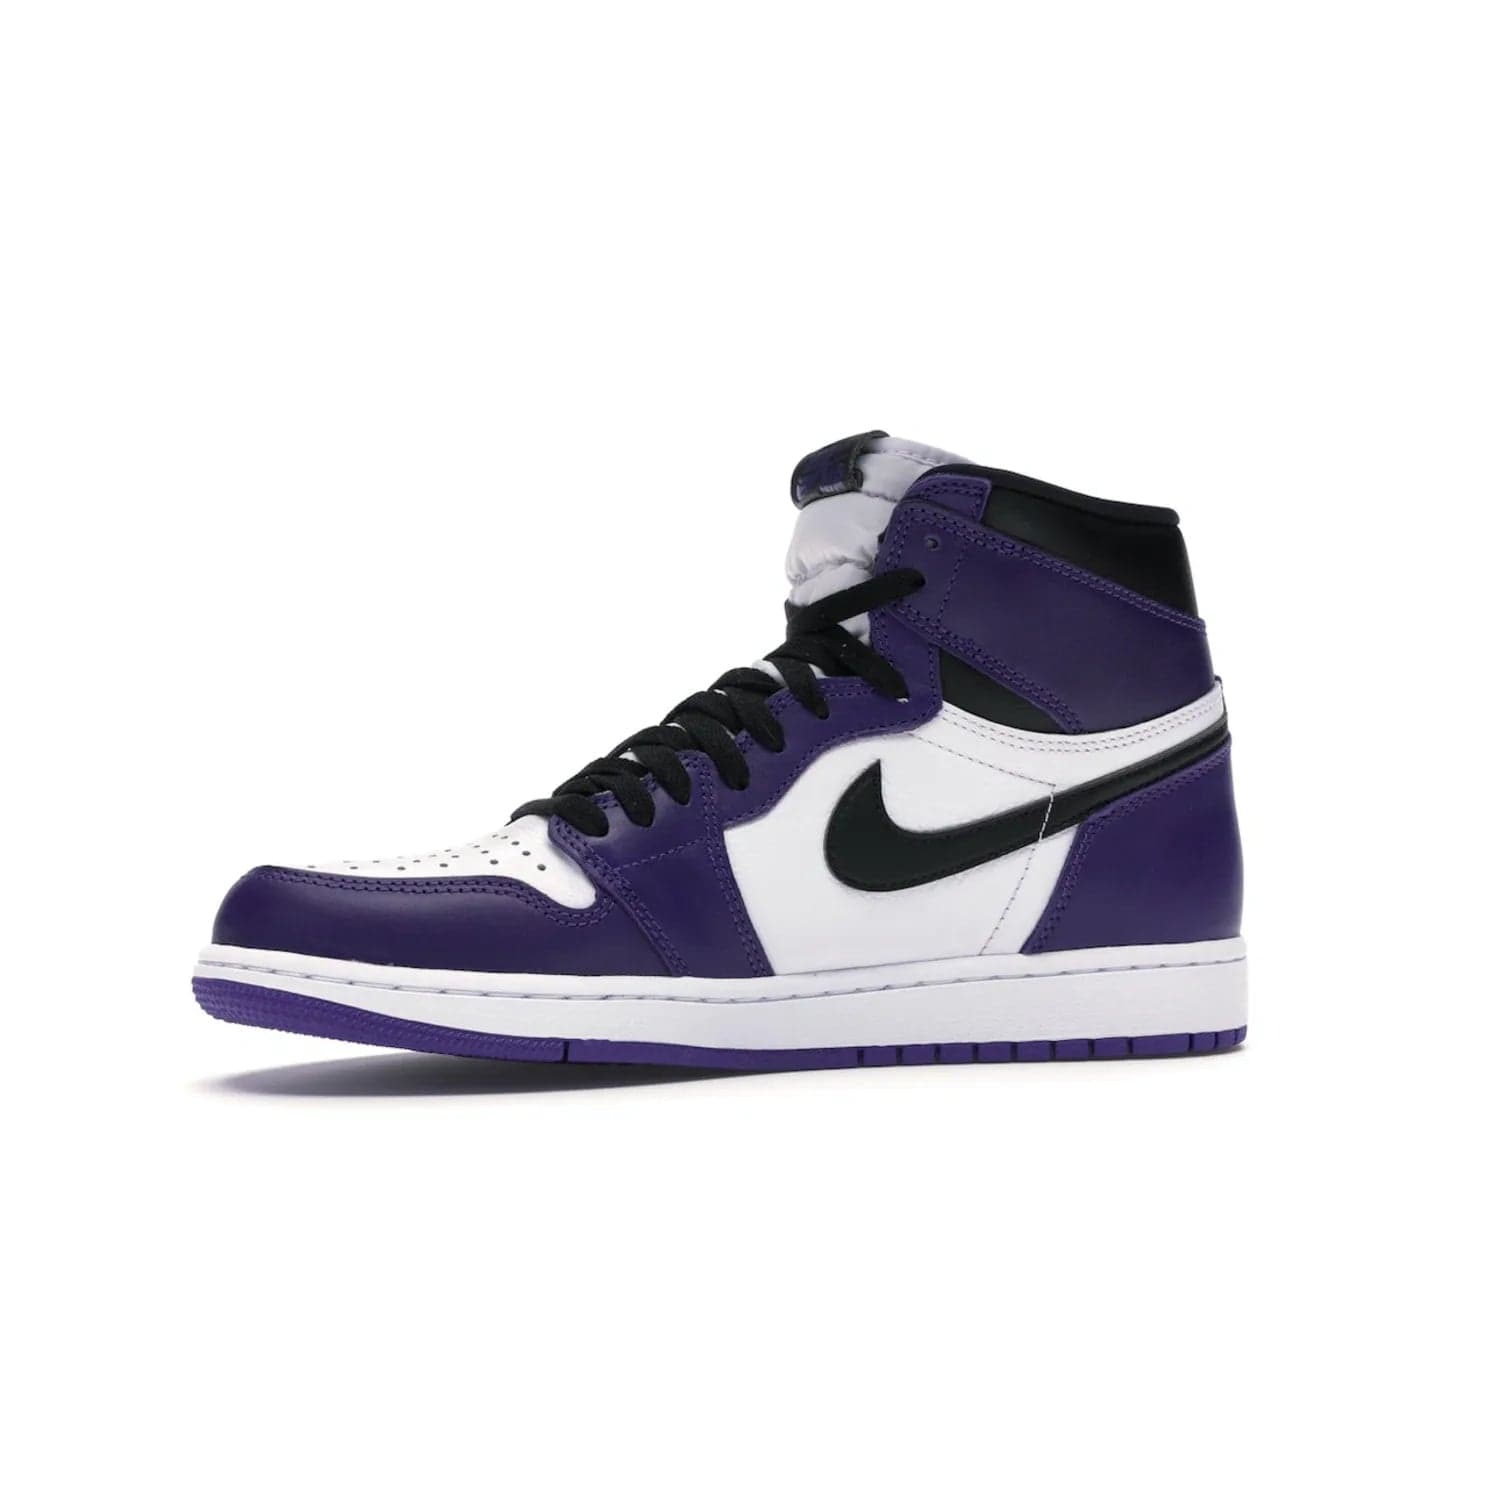 Jordan 1 Retro High Court Purple White - Image 17 - Only at www.BallersClubKickz.com - Grab the classic Jordan 1 Retro High Court Purple White and add major flavor to your collection. White leather upper with Court Purple overlays and Swoosh logo. White midsole and purple outsole. Get yours and rep your Jordan Brand.